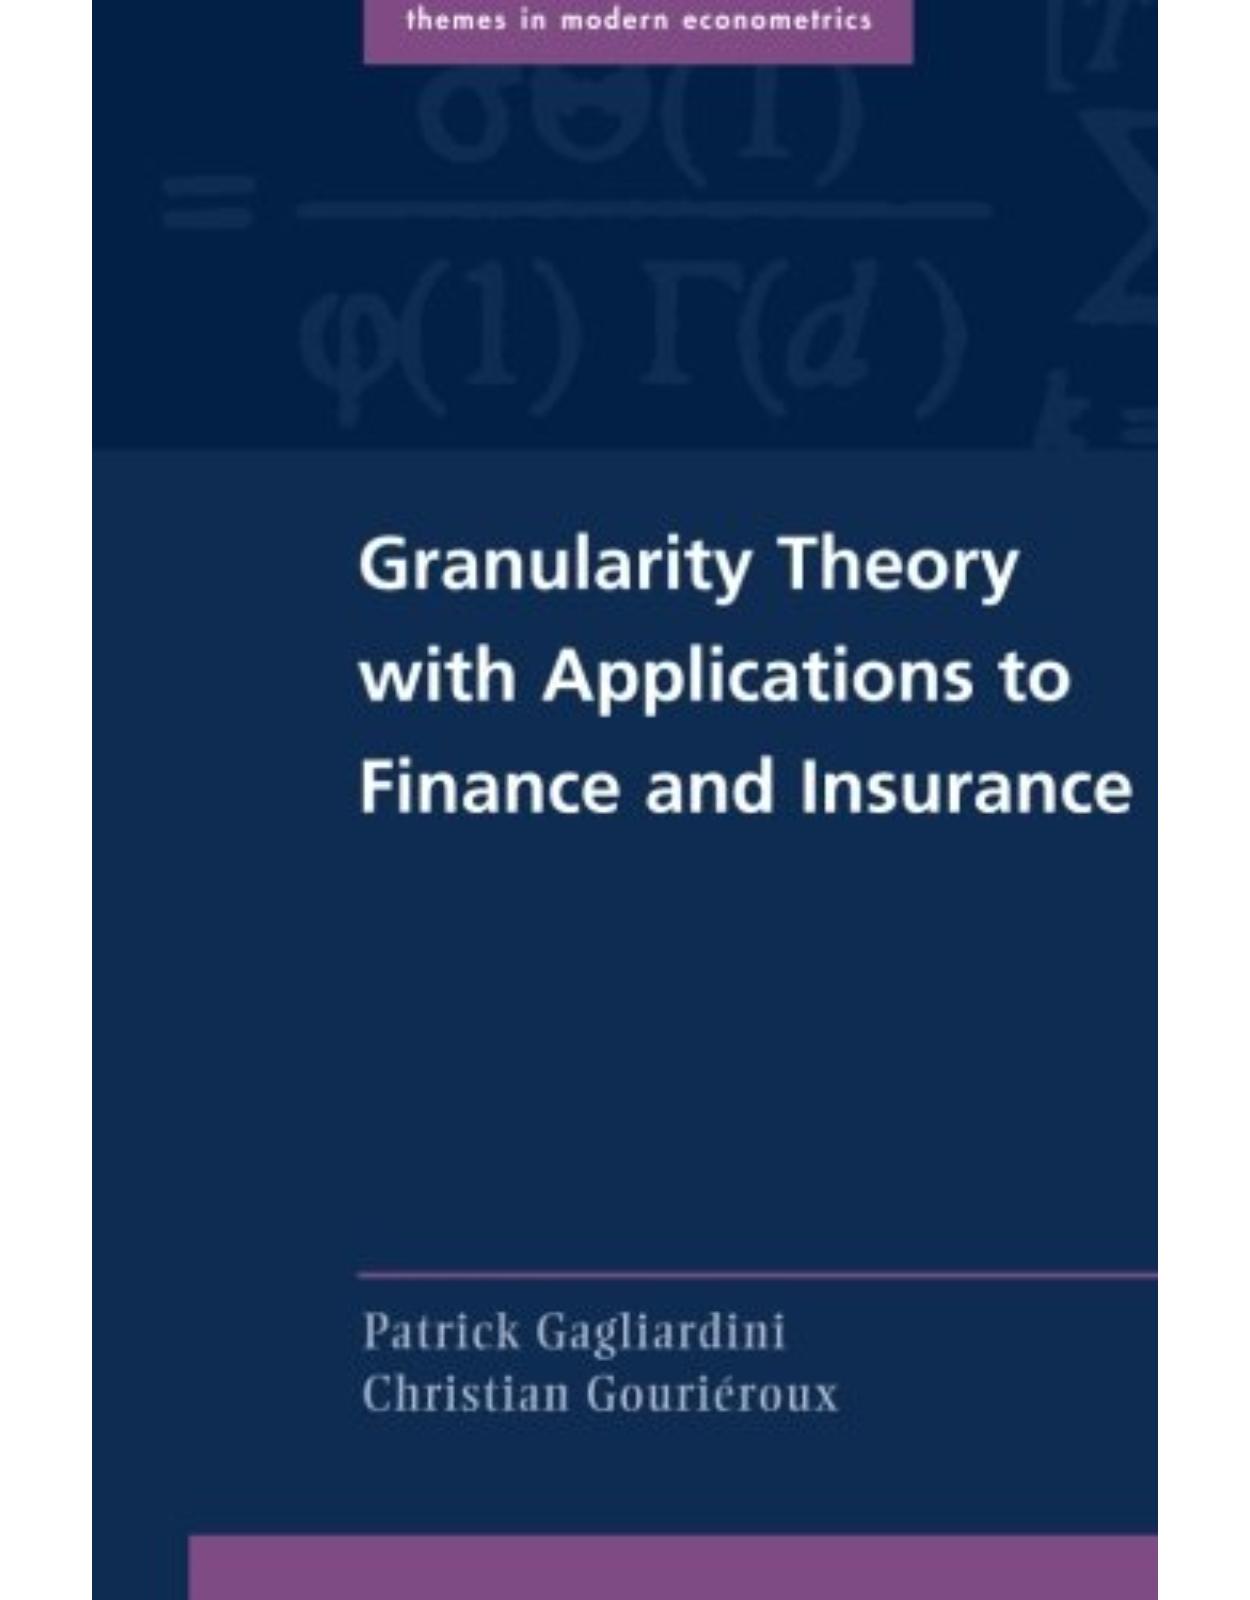 Granularity Theory with Applications to Finance and Insurance (Themes in Modern Econometrics)